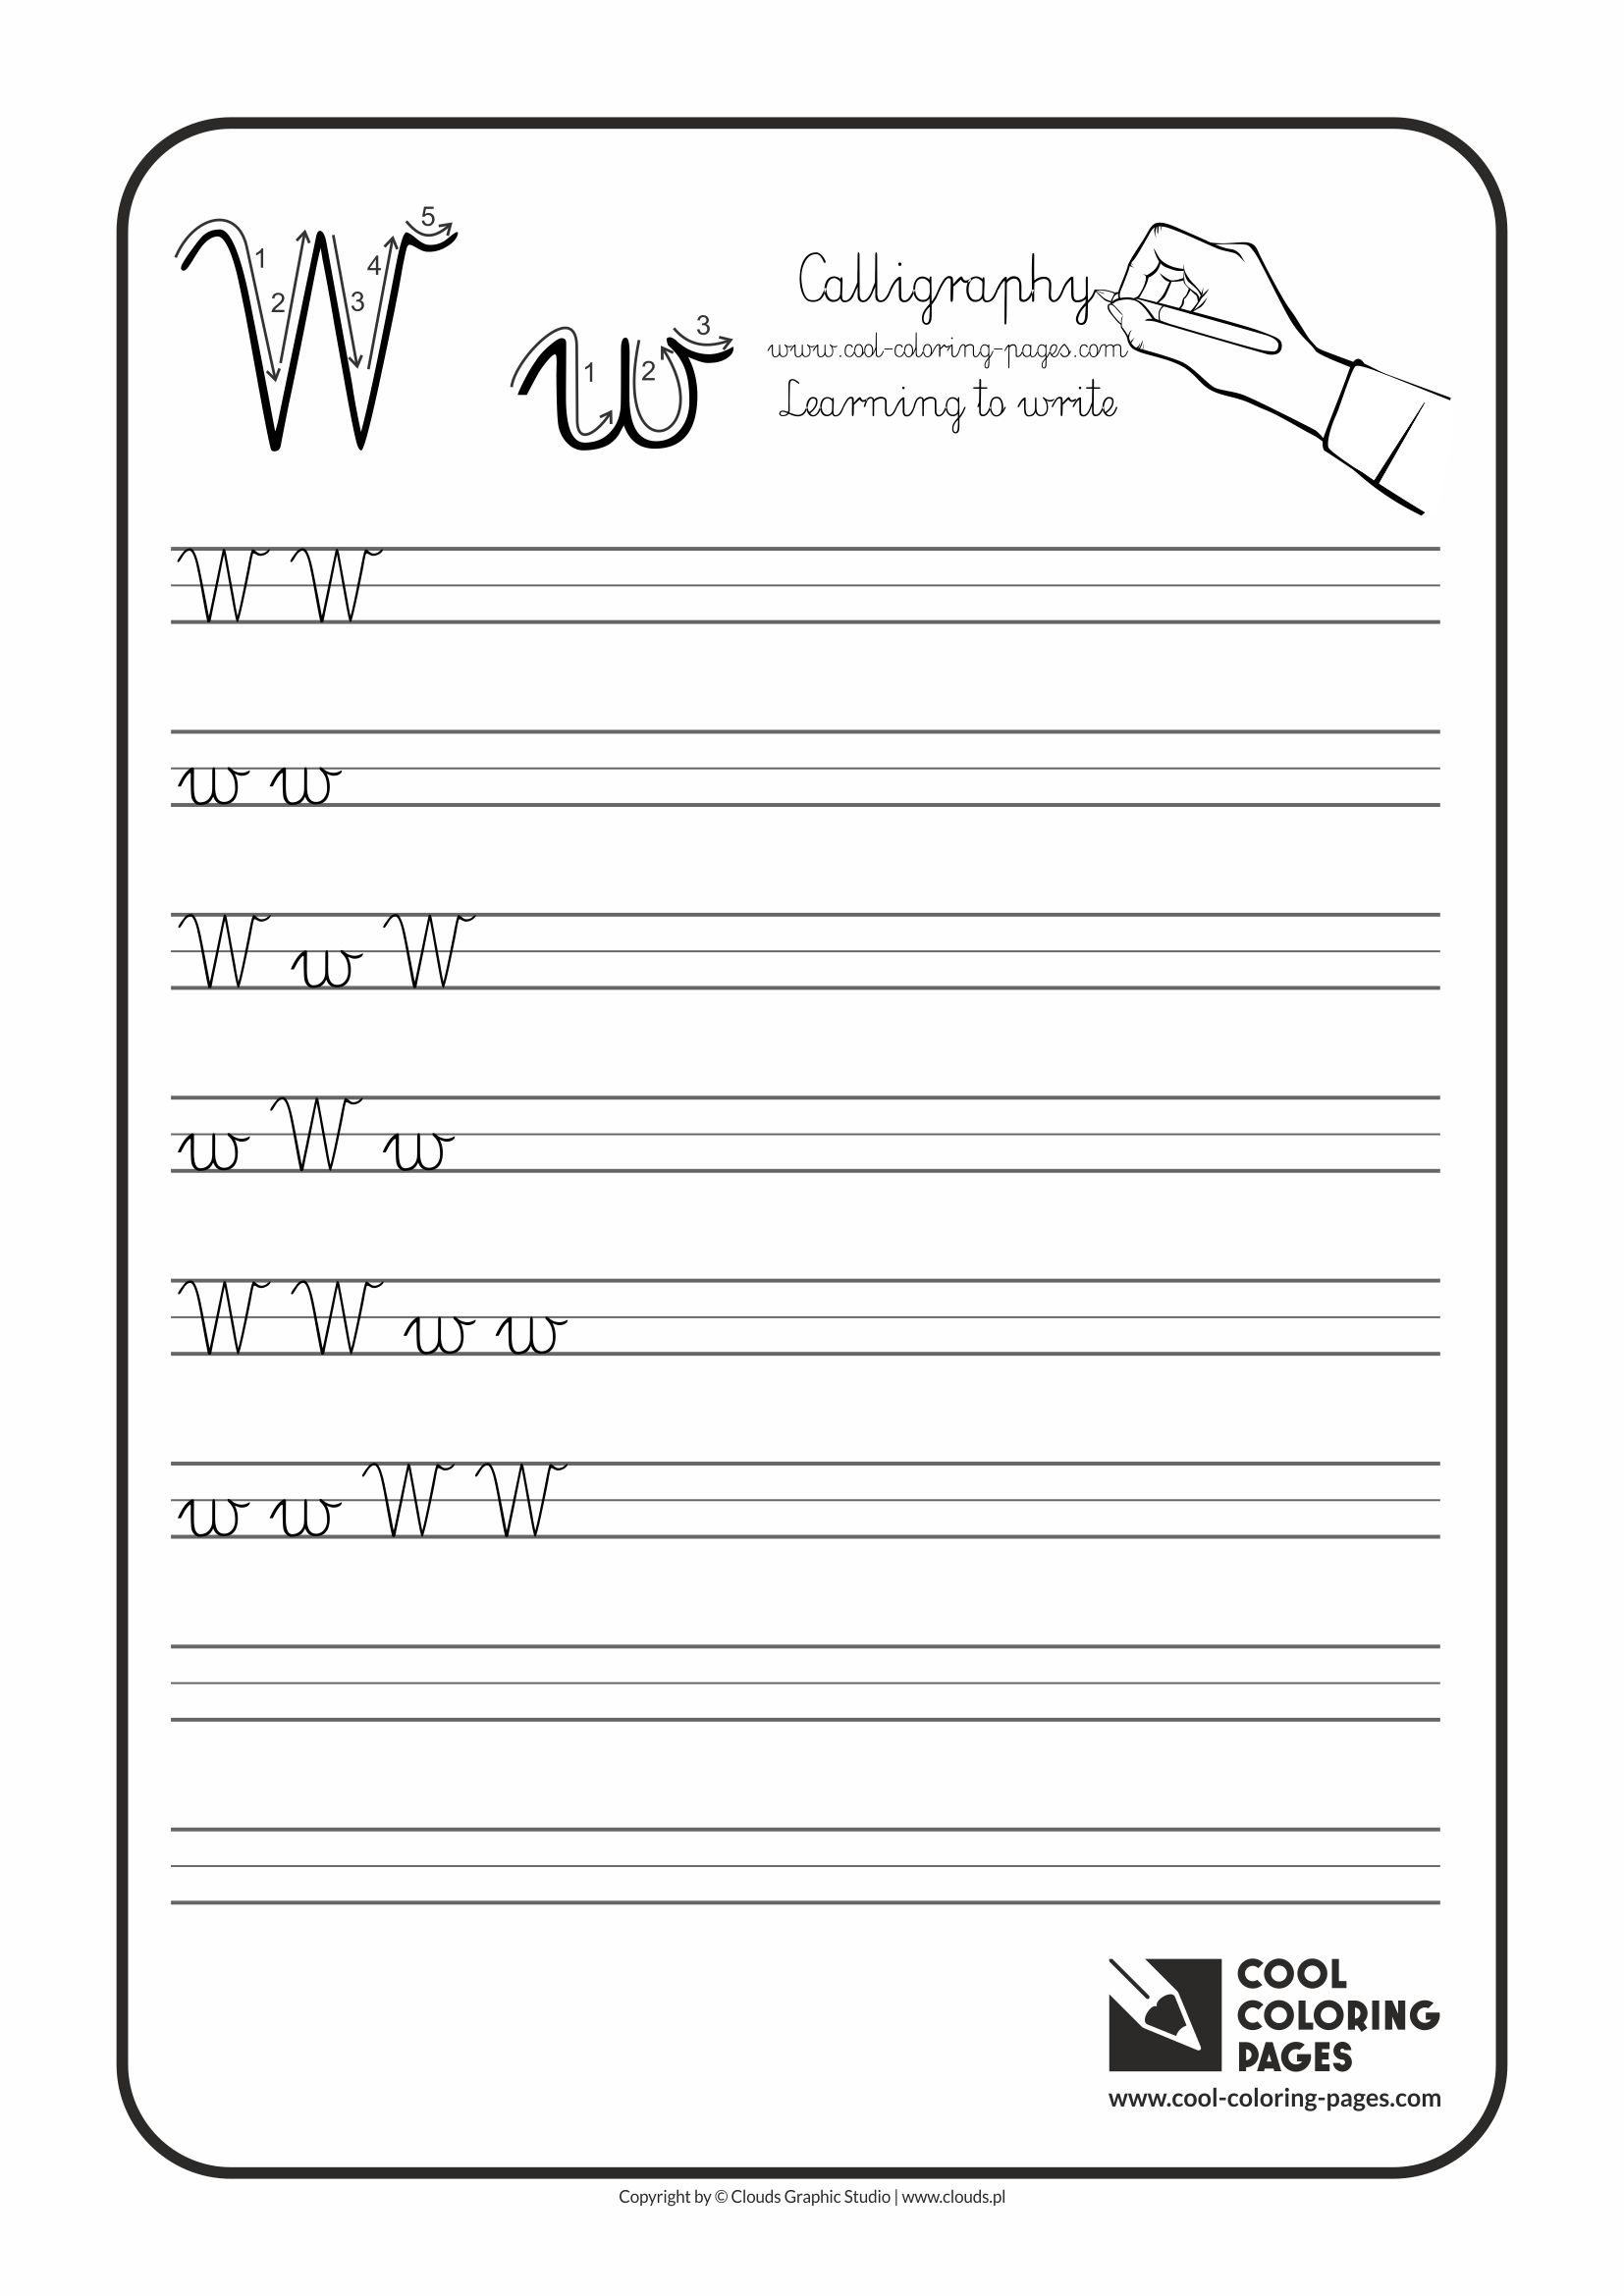 Cool Coloring Pages / Calligraphy / Letter W - Handwriting for kids / Worksheets